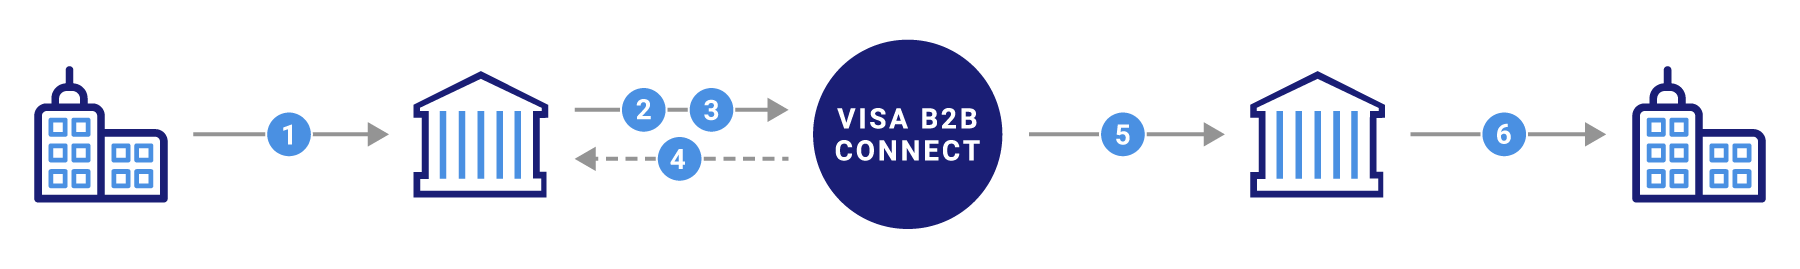 B2B Connect Overview